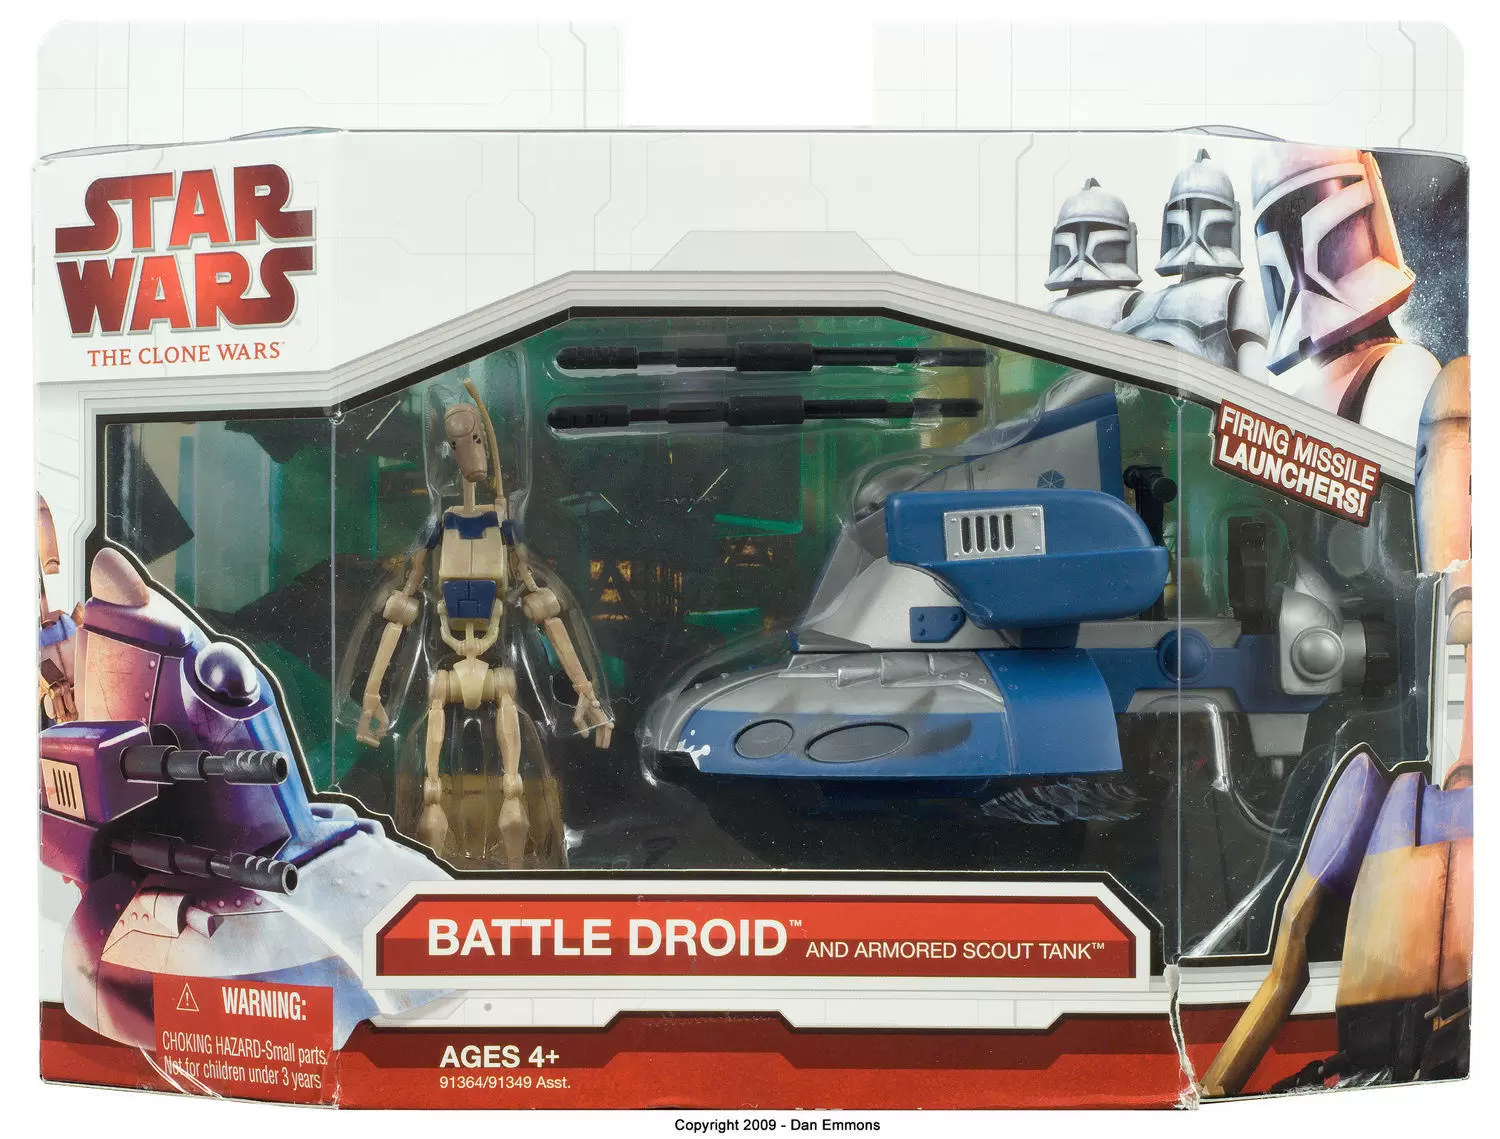 The Clone Wars (TCW 2009) - Armored Scout Tank with Battle Droid